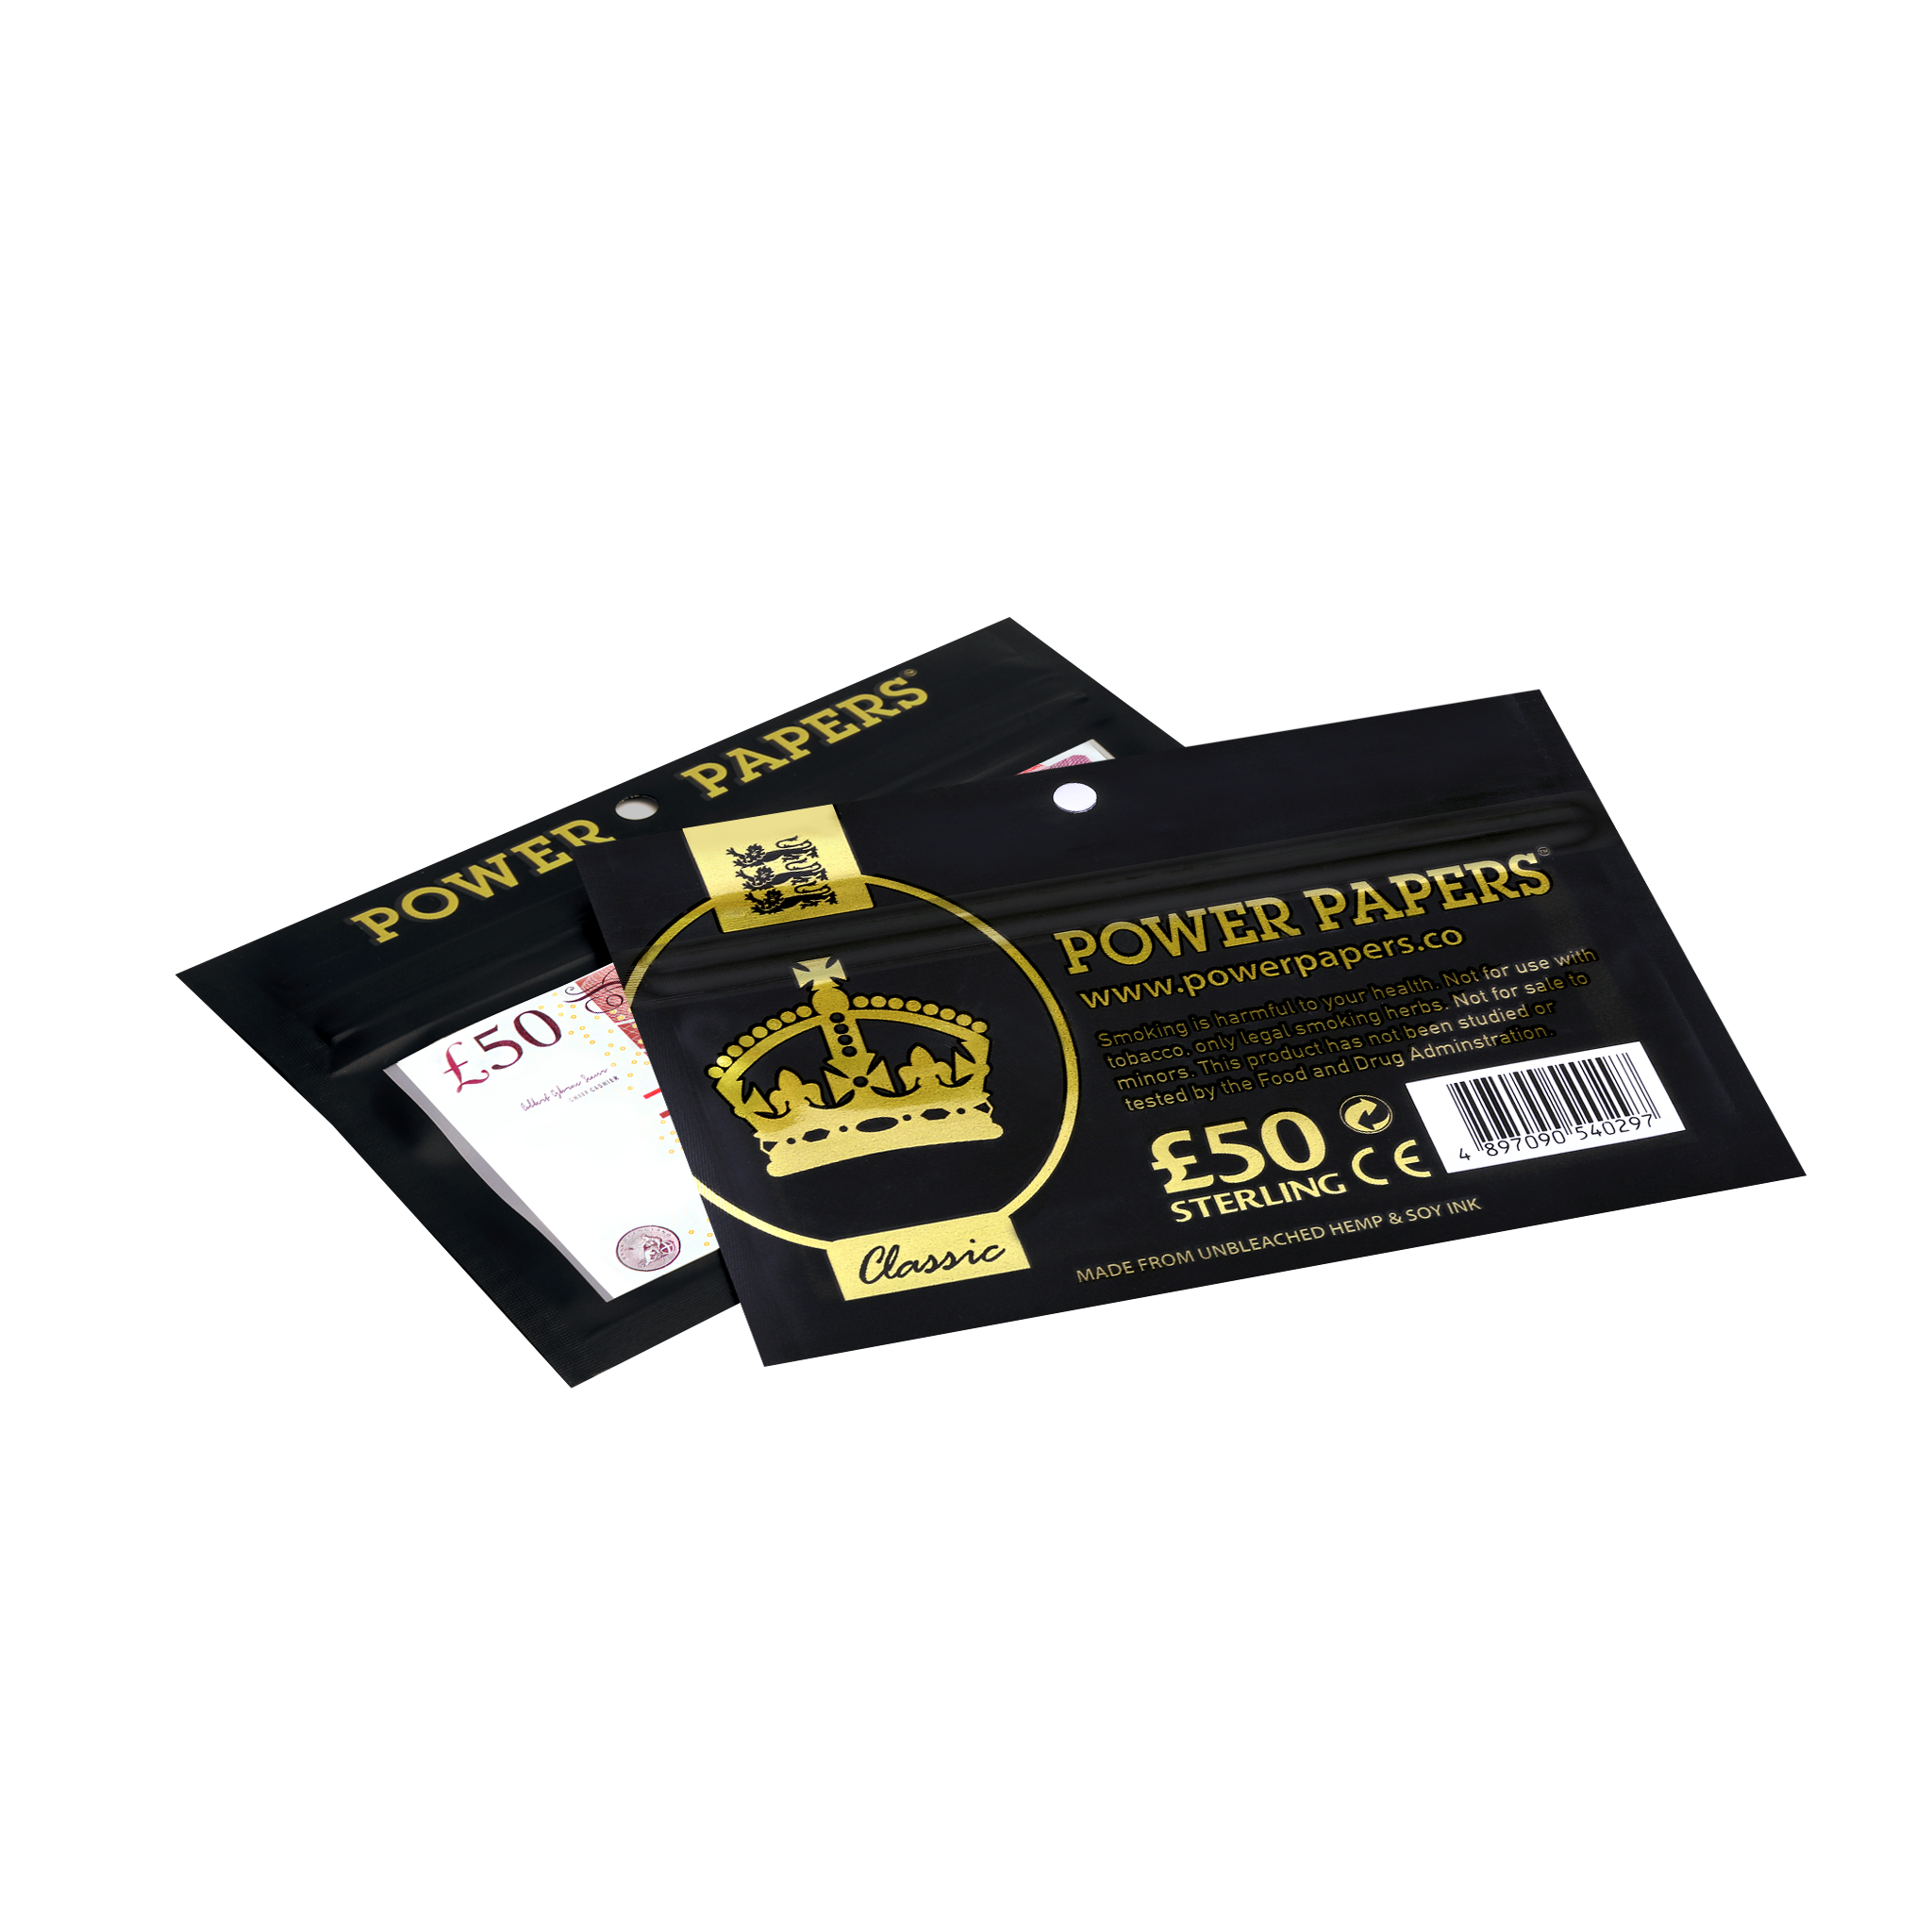 POWER PAPERS™ GBP£50 Rolling Paper